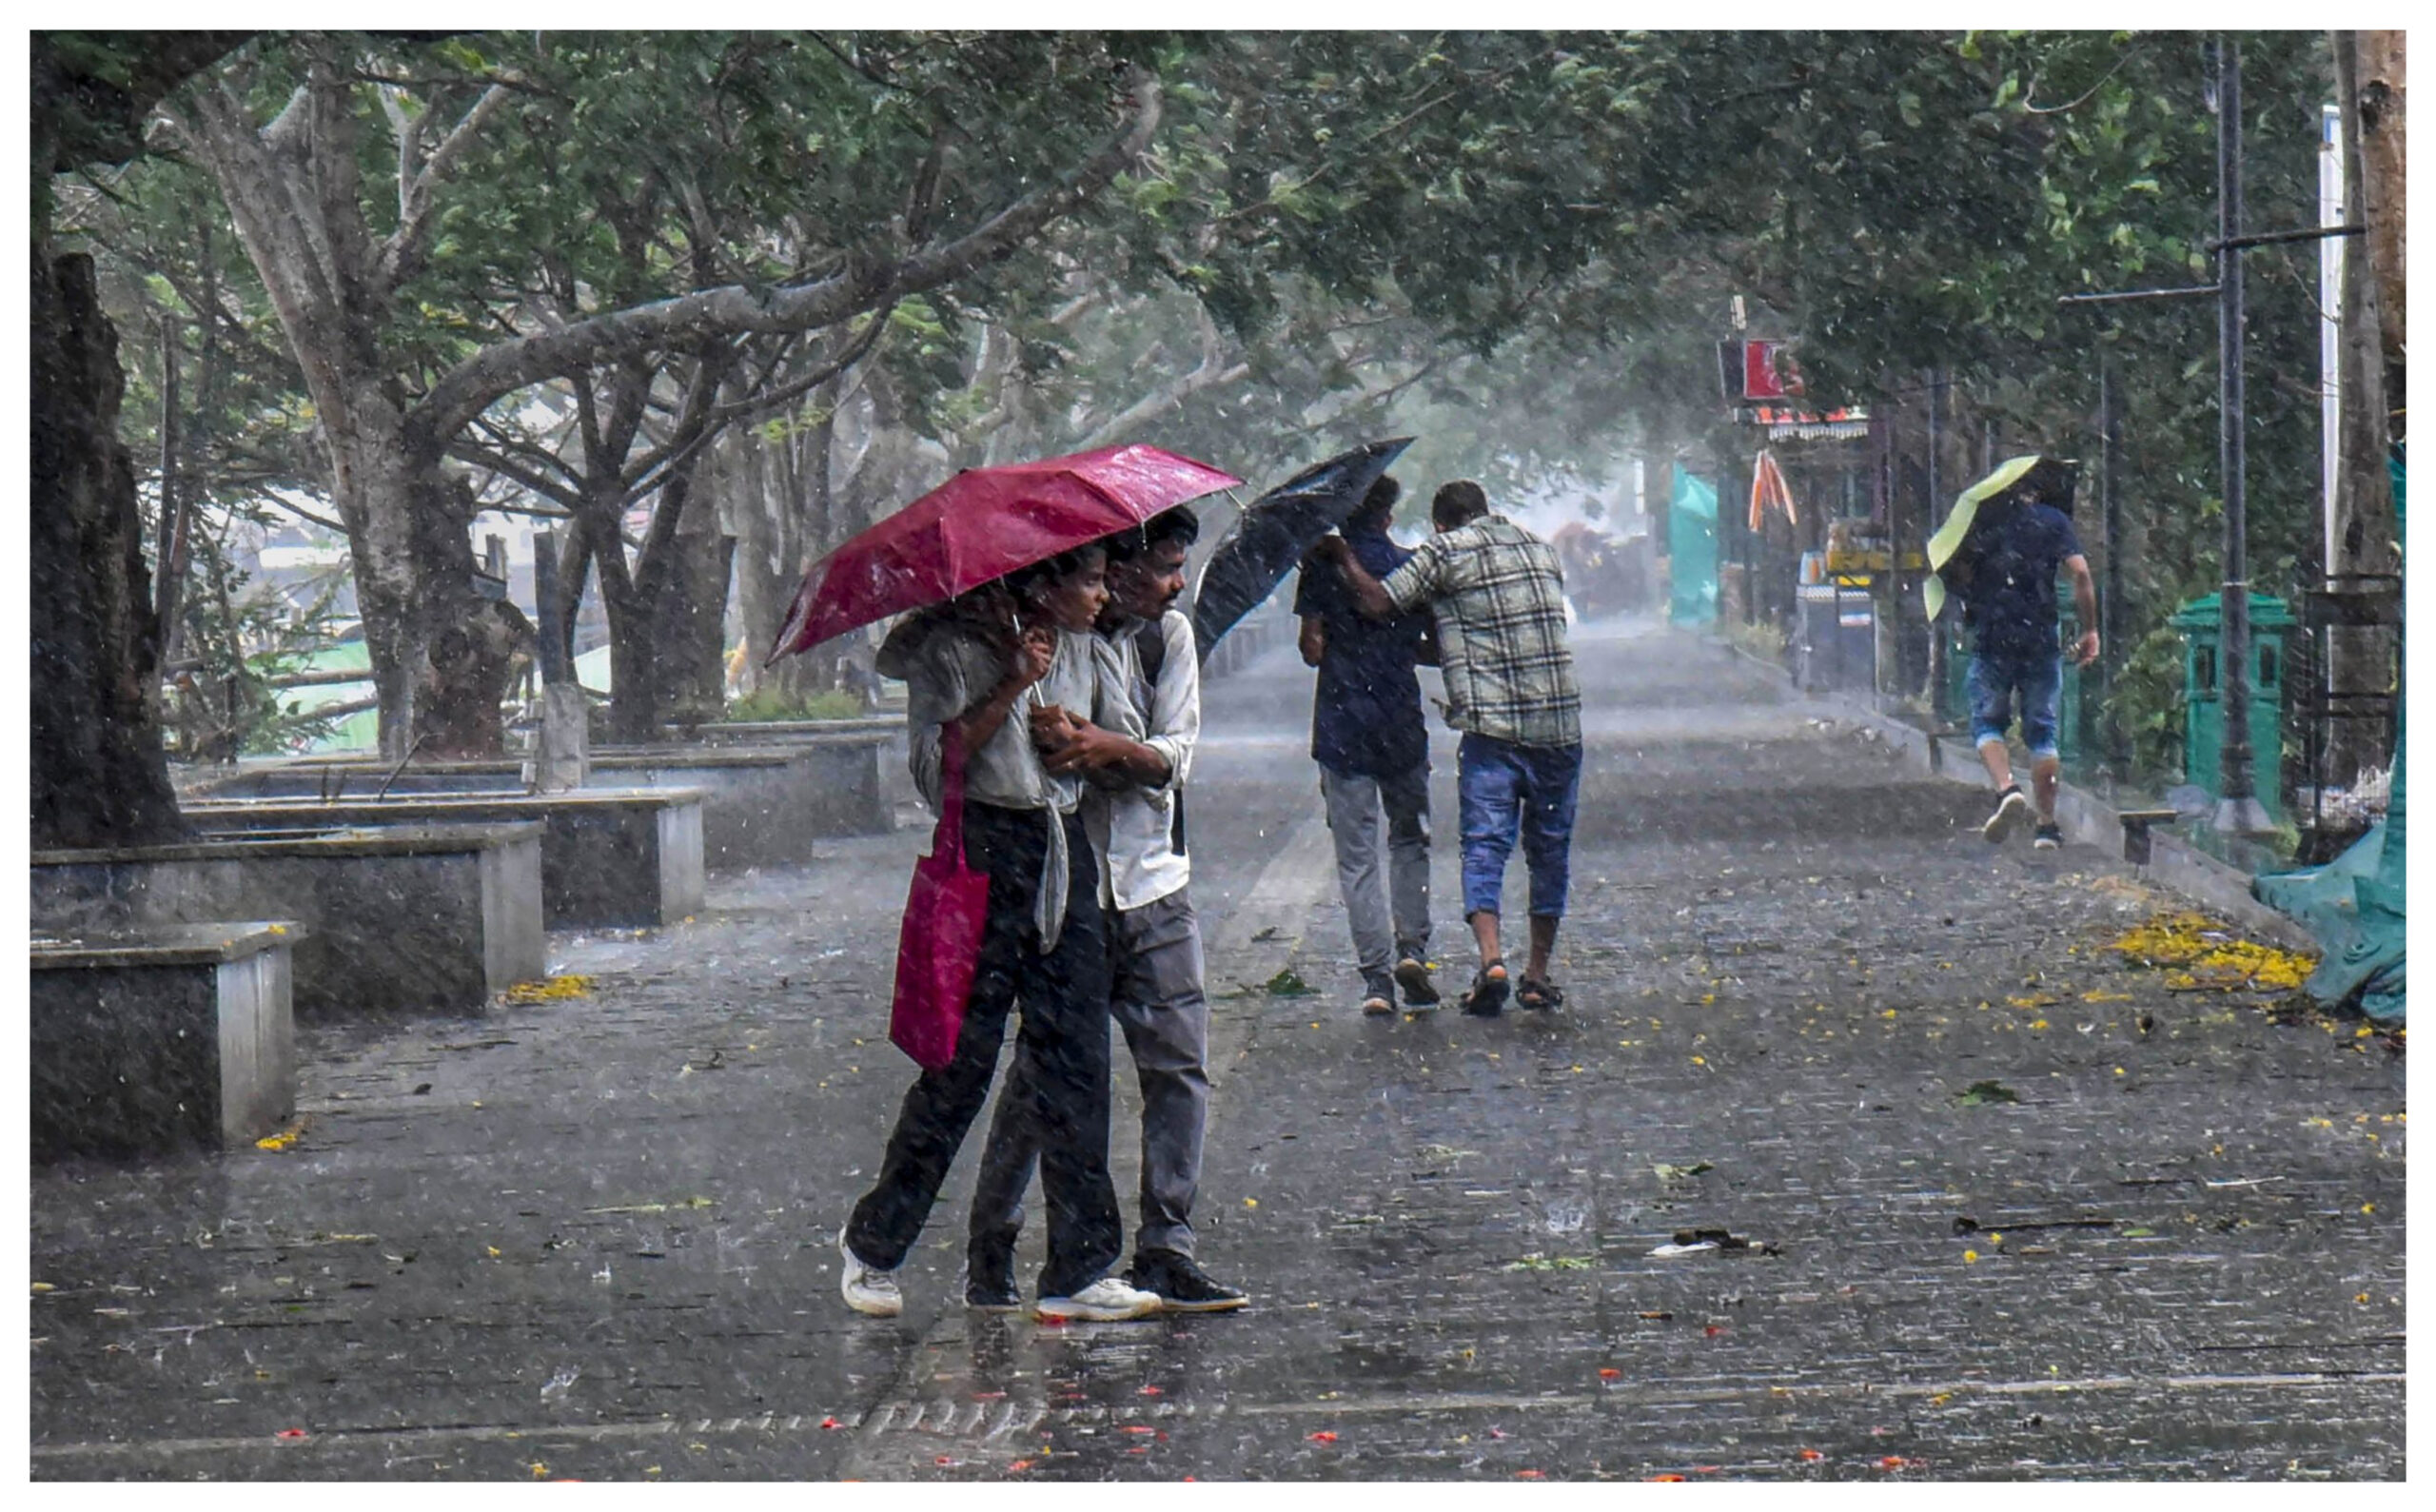 Weather Update: Drop in temperature! There will be pre-monsoon rain in these states including Delhi, Delhi Weather News, Weather Forecast, Delhi Rain, Delhi Heat Wave, Delhi temperature, Delhi news, Pre monsoon rain in india, pre monsoon showers, Pre monsoon rain today, weather today, IMD weather update, mausam, #delhi, #weather, #WeatherUpdate, #forecast, #heatwave, #premonsoon, #rain, #summer, #mausam-youtube-facebook-twitter-google-amazon,totaltv live, total news in hindi